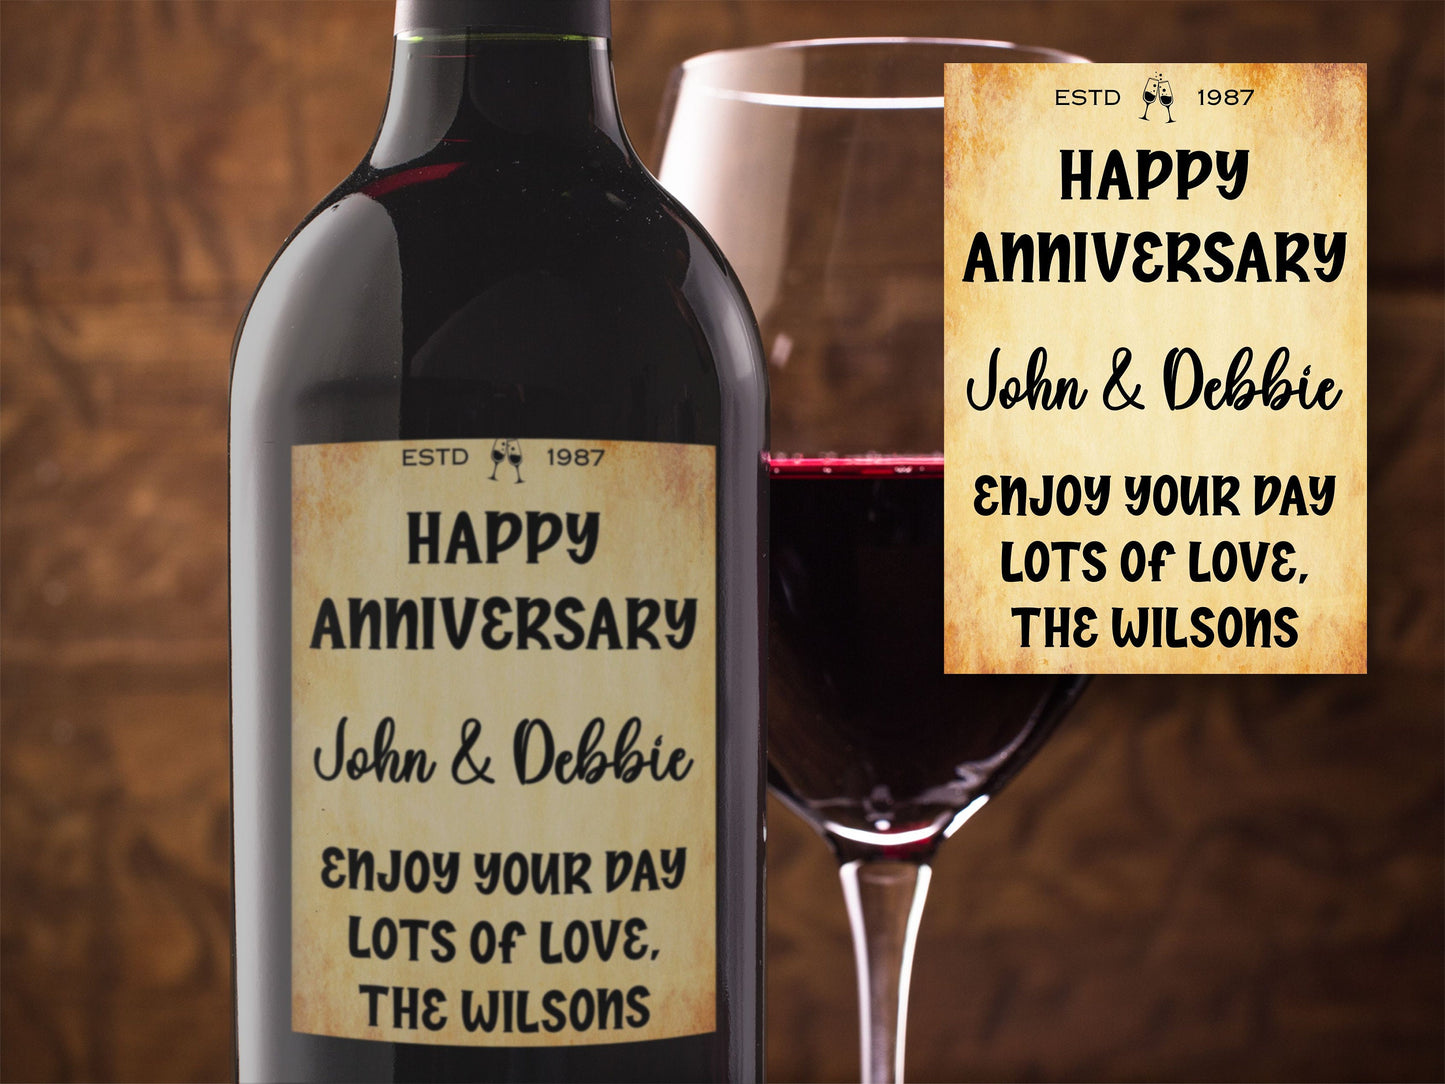 Happy Anniversary Bottle Labels  x2 - Vintage Style - Any Name Year and Message - To fit Wine Alcohol Bottles 68x99mm